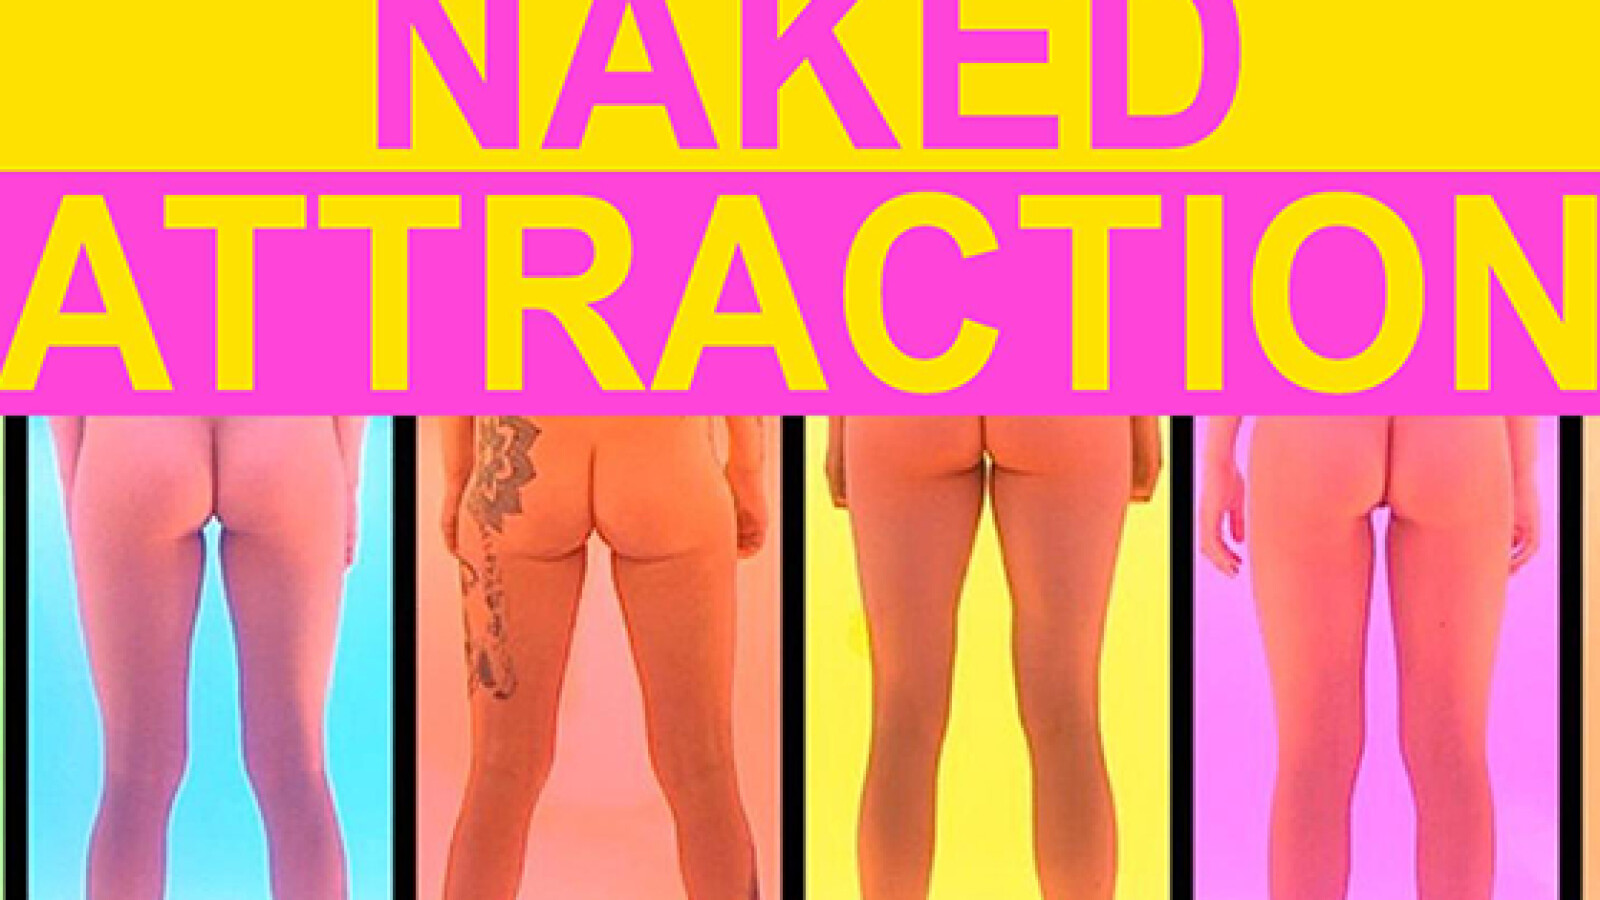 Naked wann attraction kommt Urban Decay